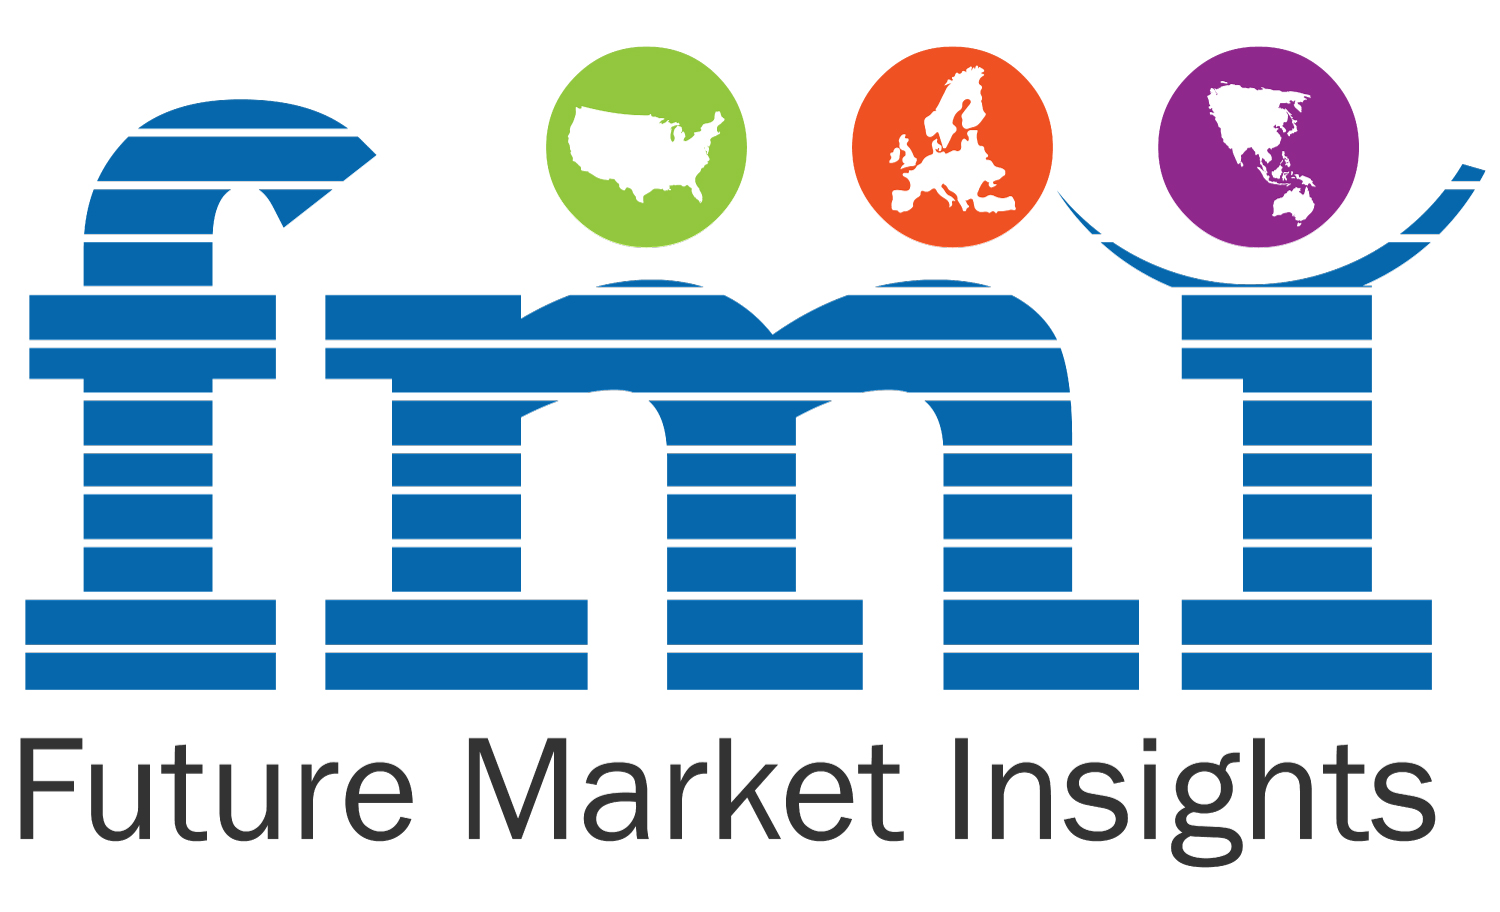 Food Amino Acids Market to be Worth US$ 19.6 Billion by 2033 - Exclusive Report by Future Market Insights, Inc.